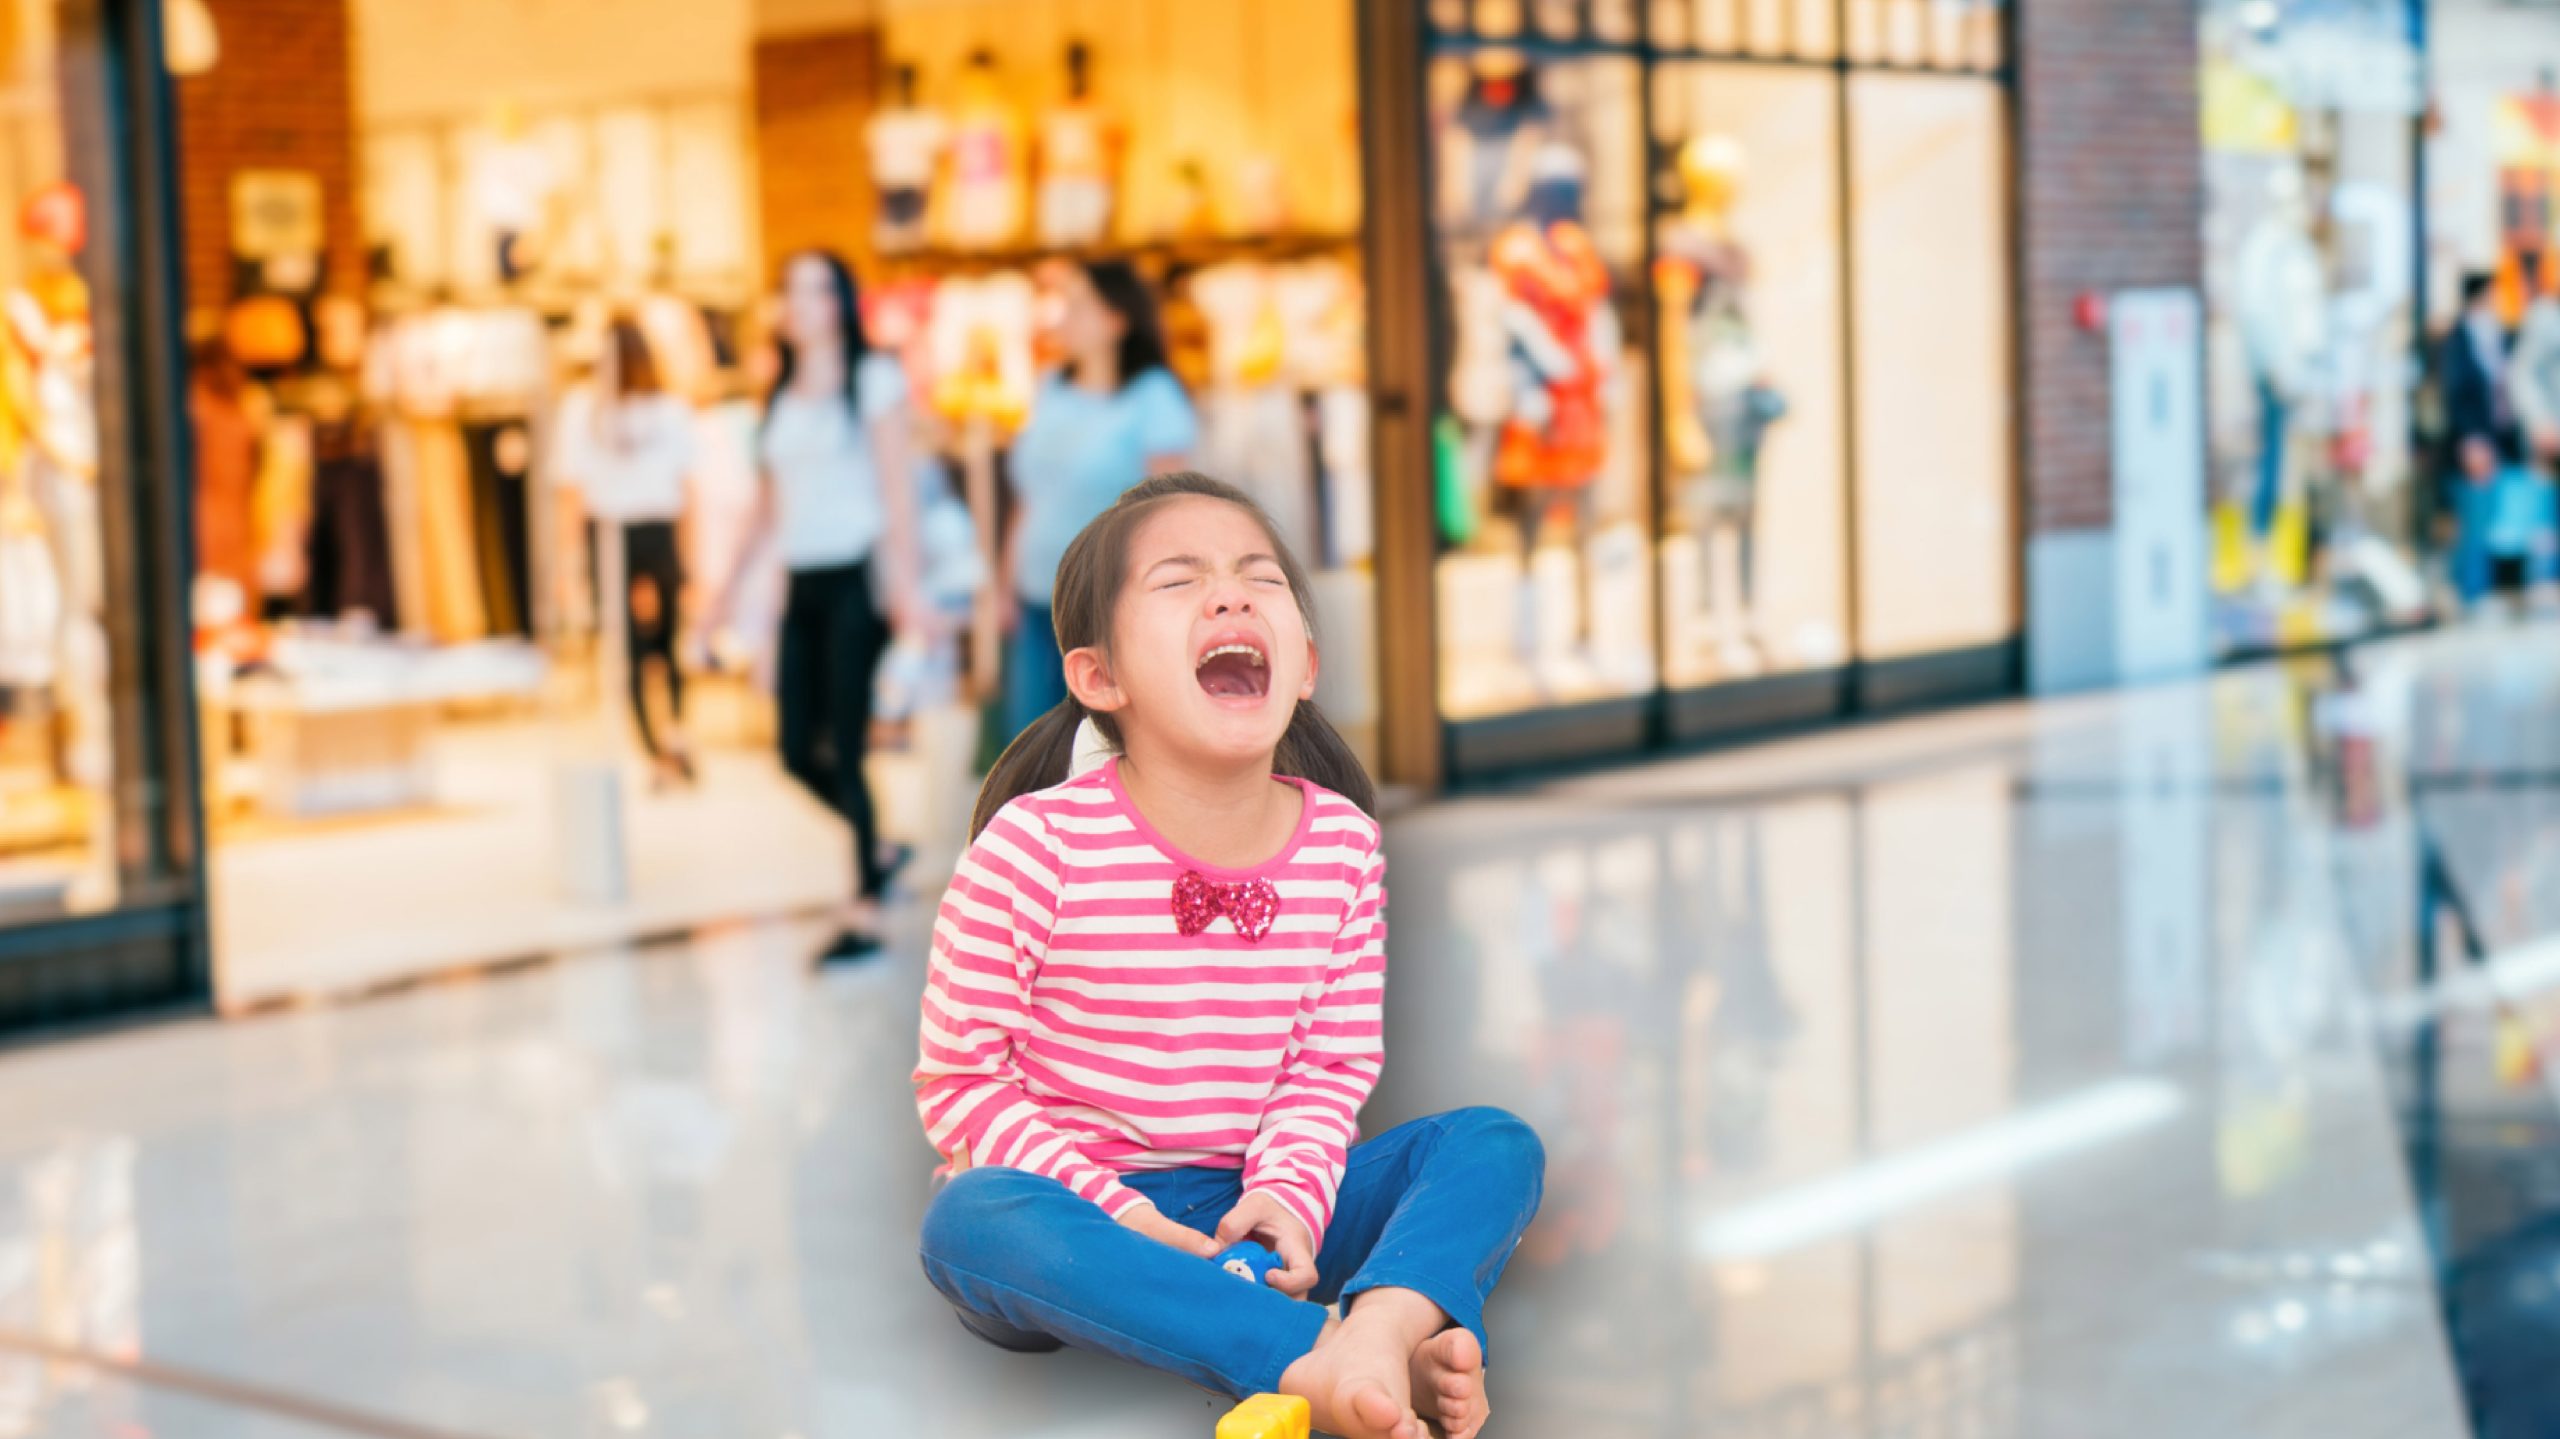 Oh, NO! My Children Did It Again!  Here are 4 Tips on How to Handle Tantrums in Public